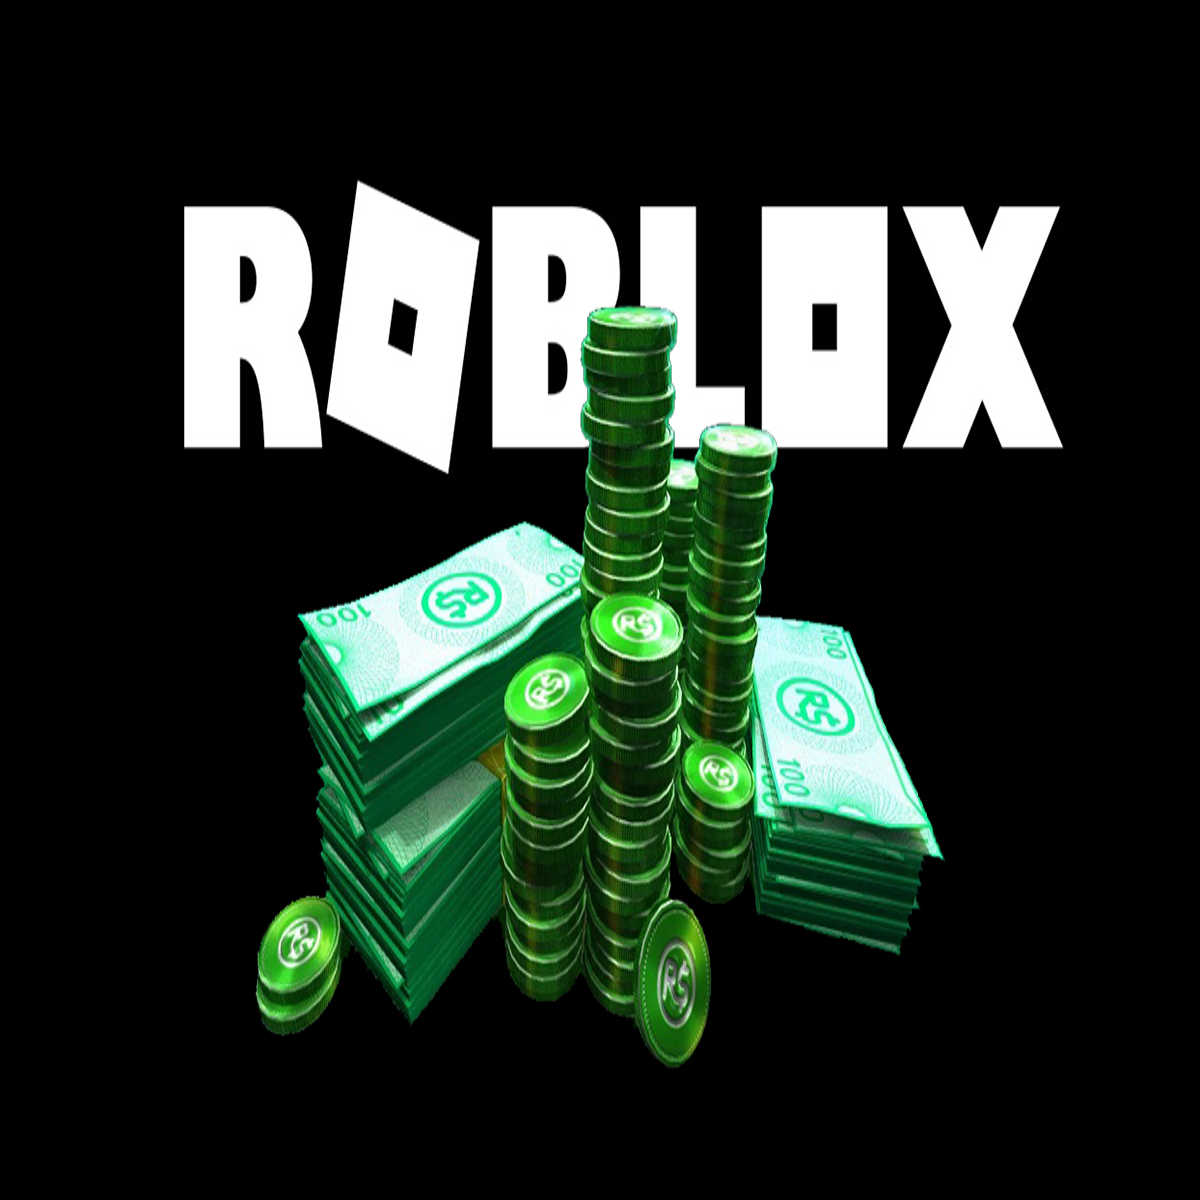 Roblox Just Settled a $10 Million Lawsuit and You Could Benefit From It, by Bloxy News